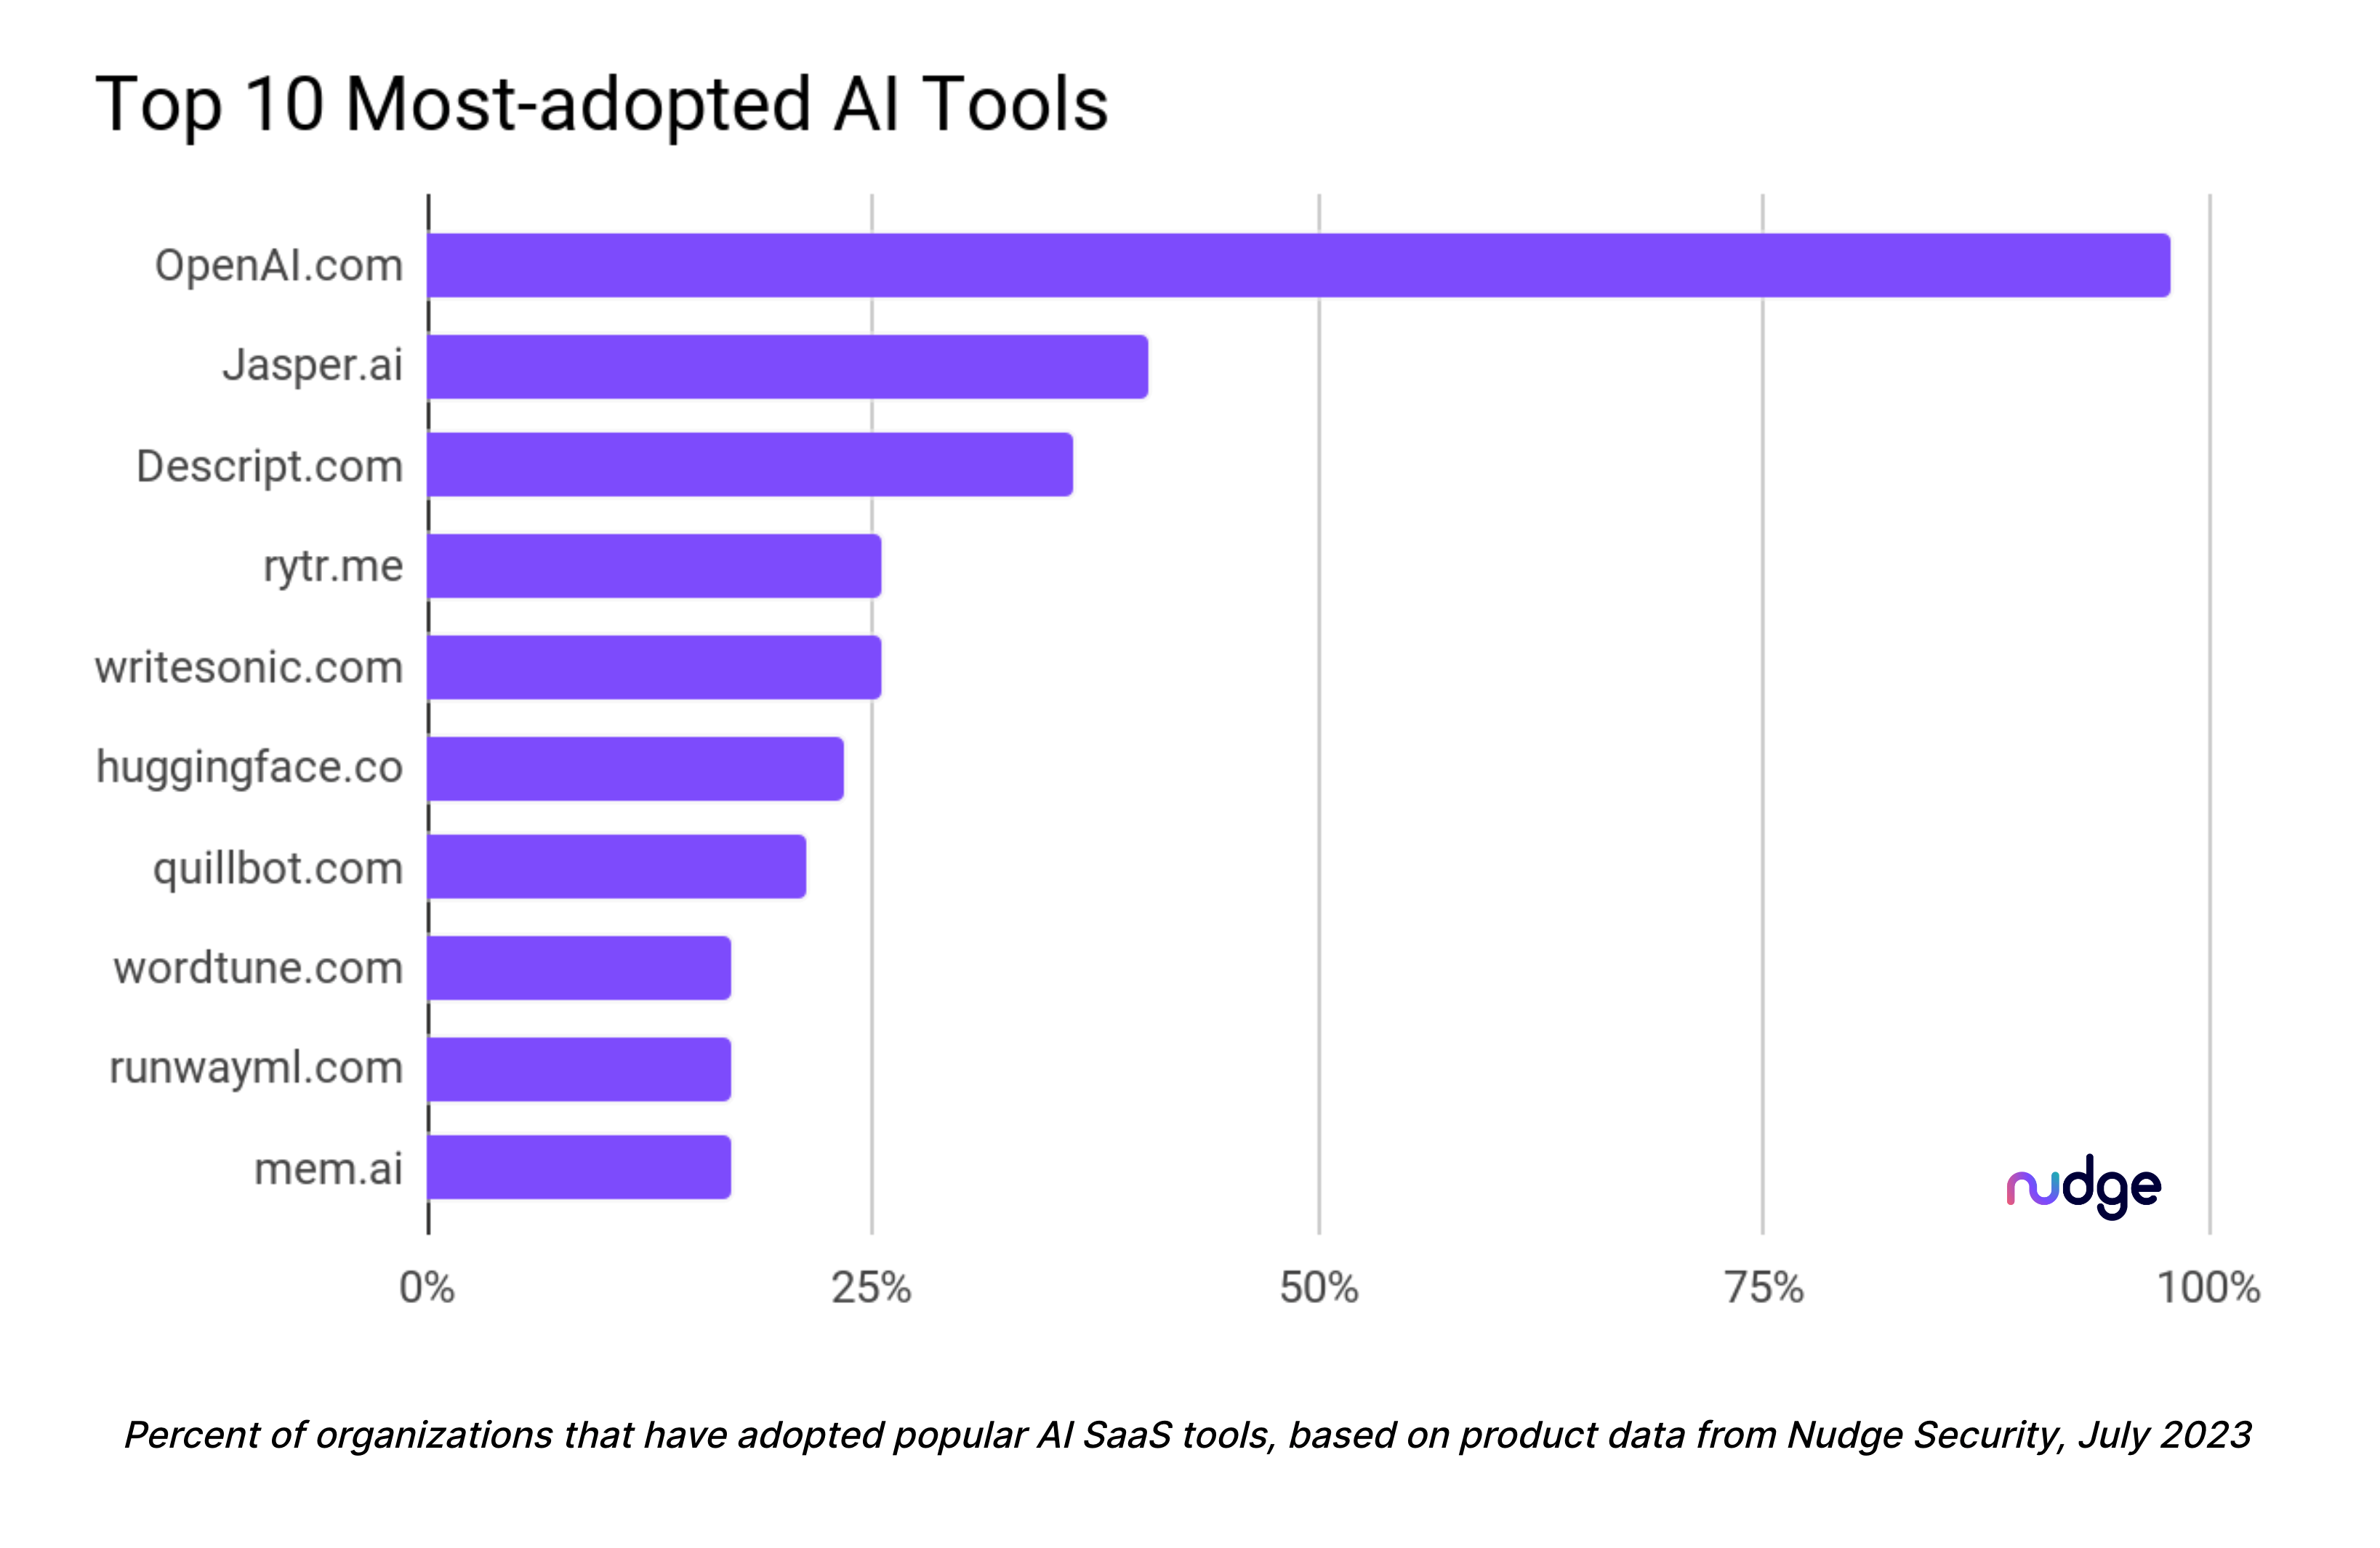 Infosec Doesn’t Know What AI Tools Orgs Are Using – Source: www.darkreading.com